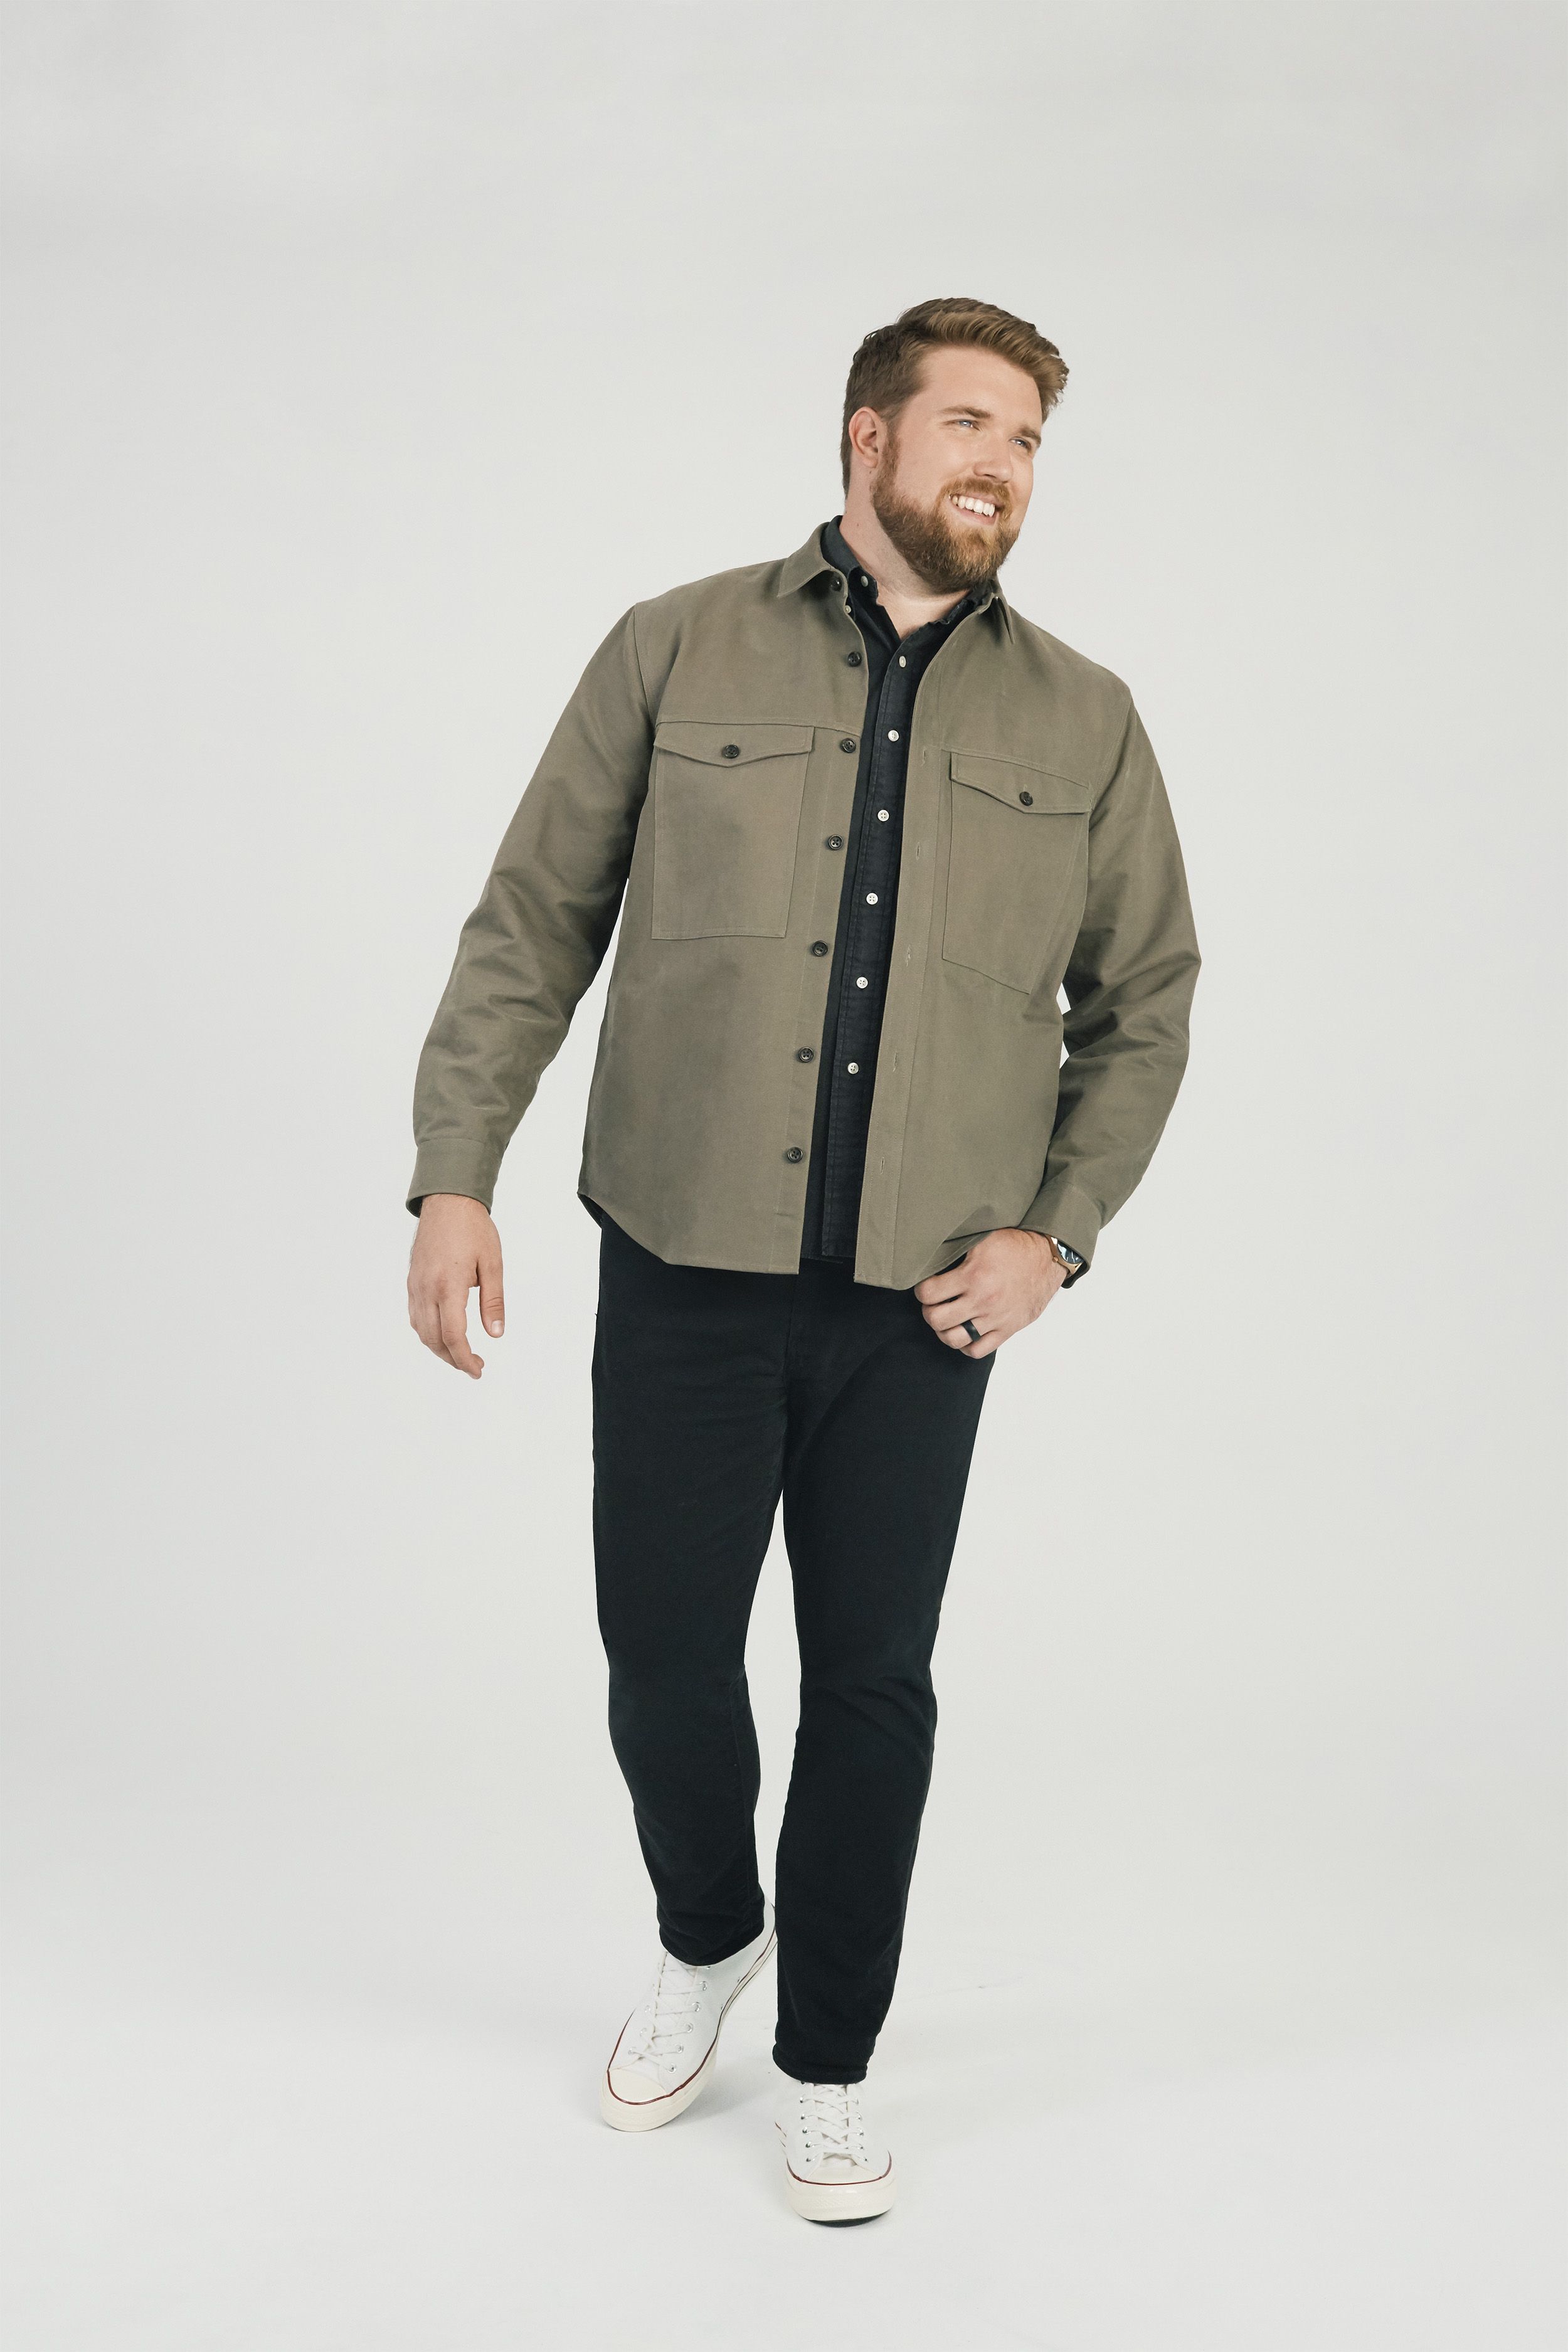 Why Big and Tall Men's Clothing Is So Hard to Find - Men's Plus Size Fashion  Brands